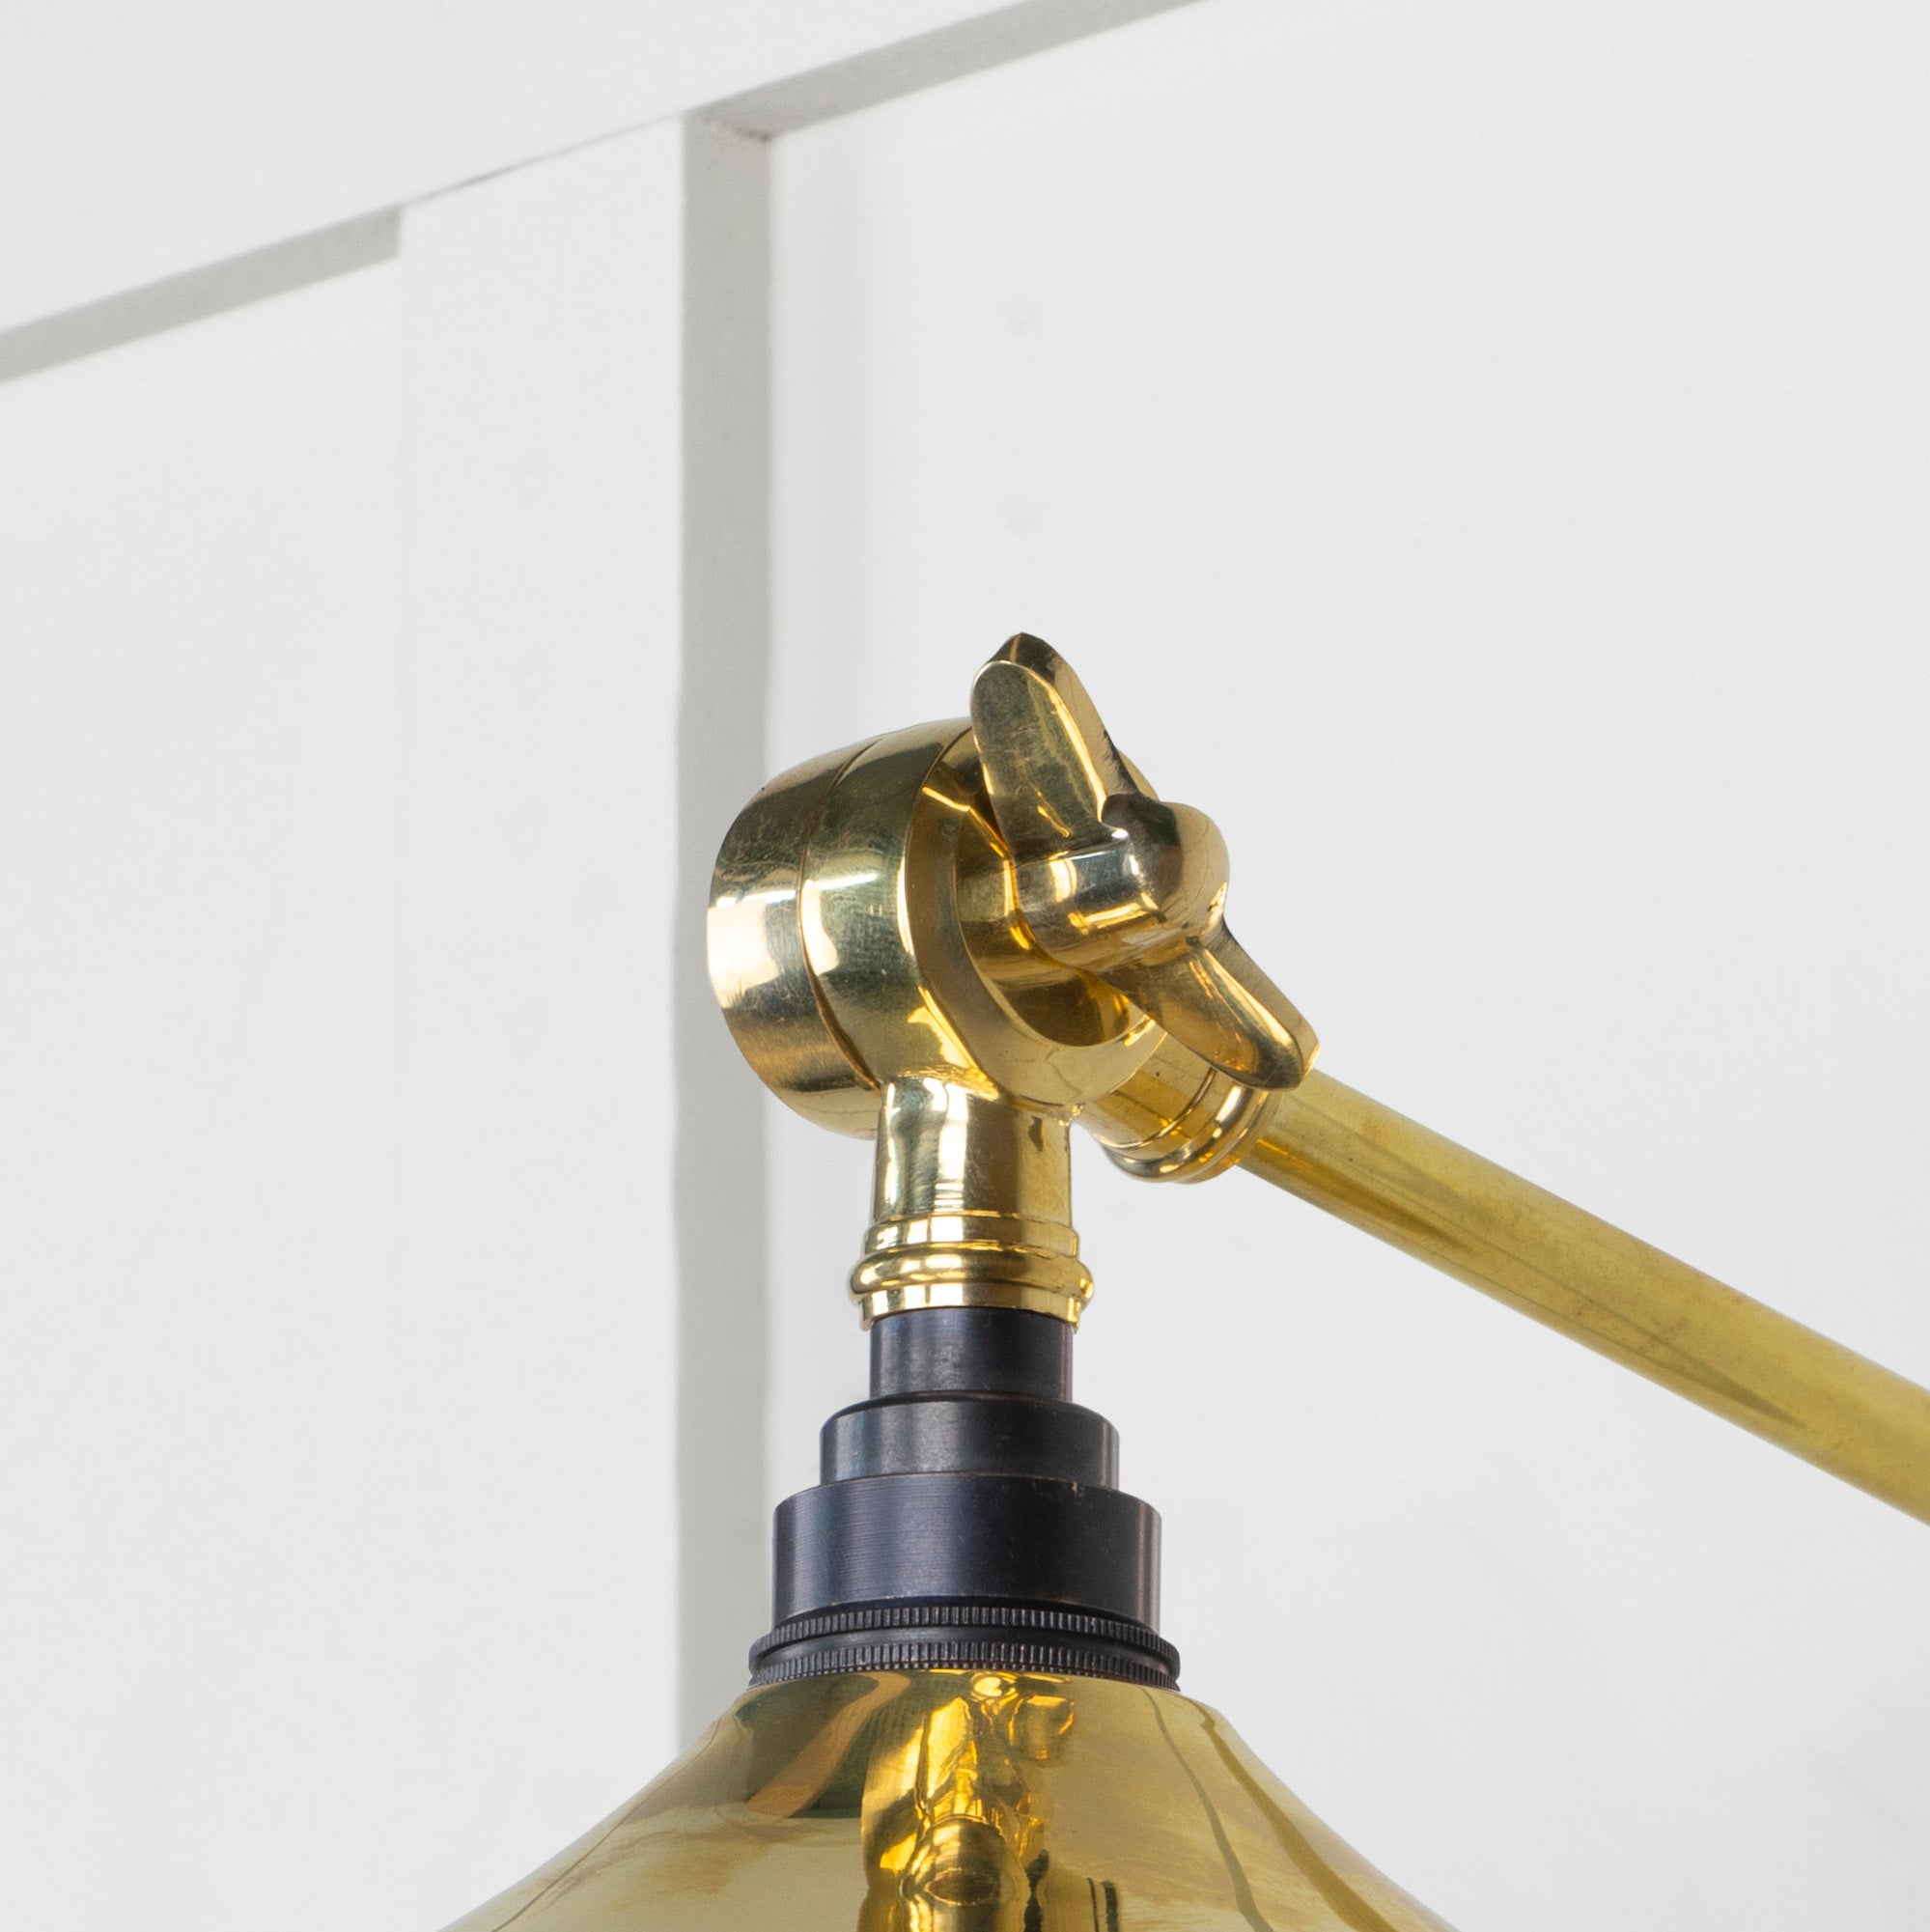 SHOW Close Up Image of Upper Hinge of Flora Wall Light in Brass